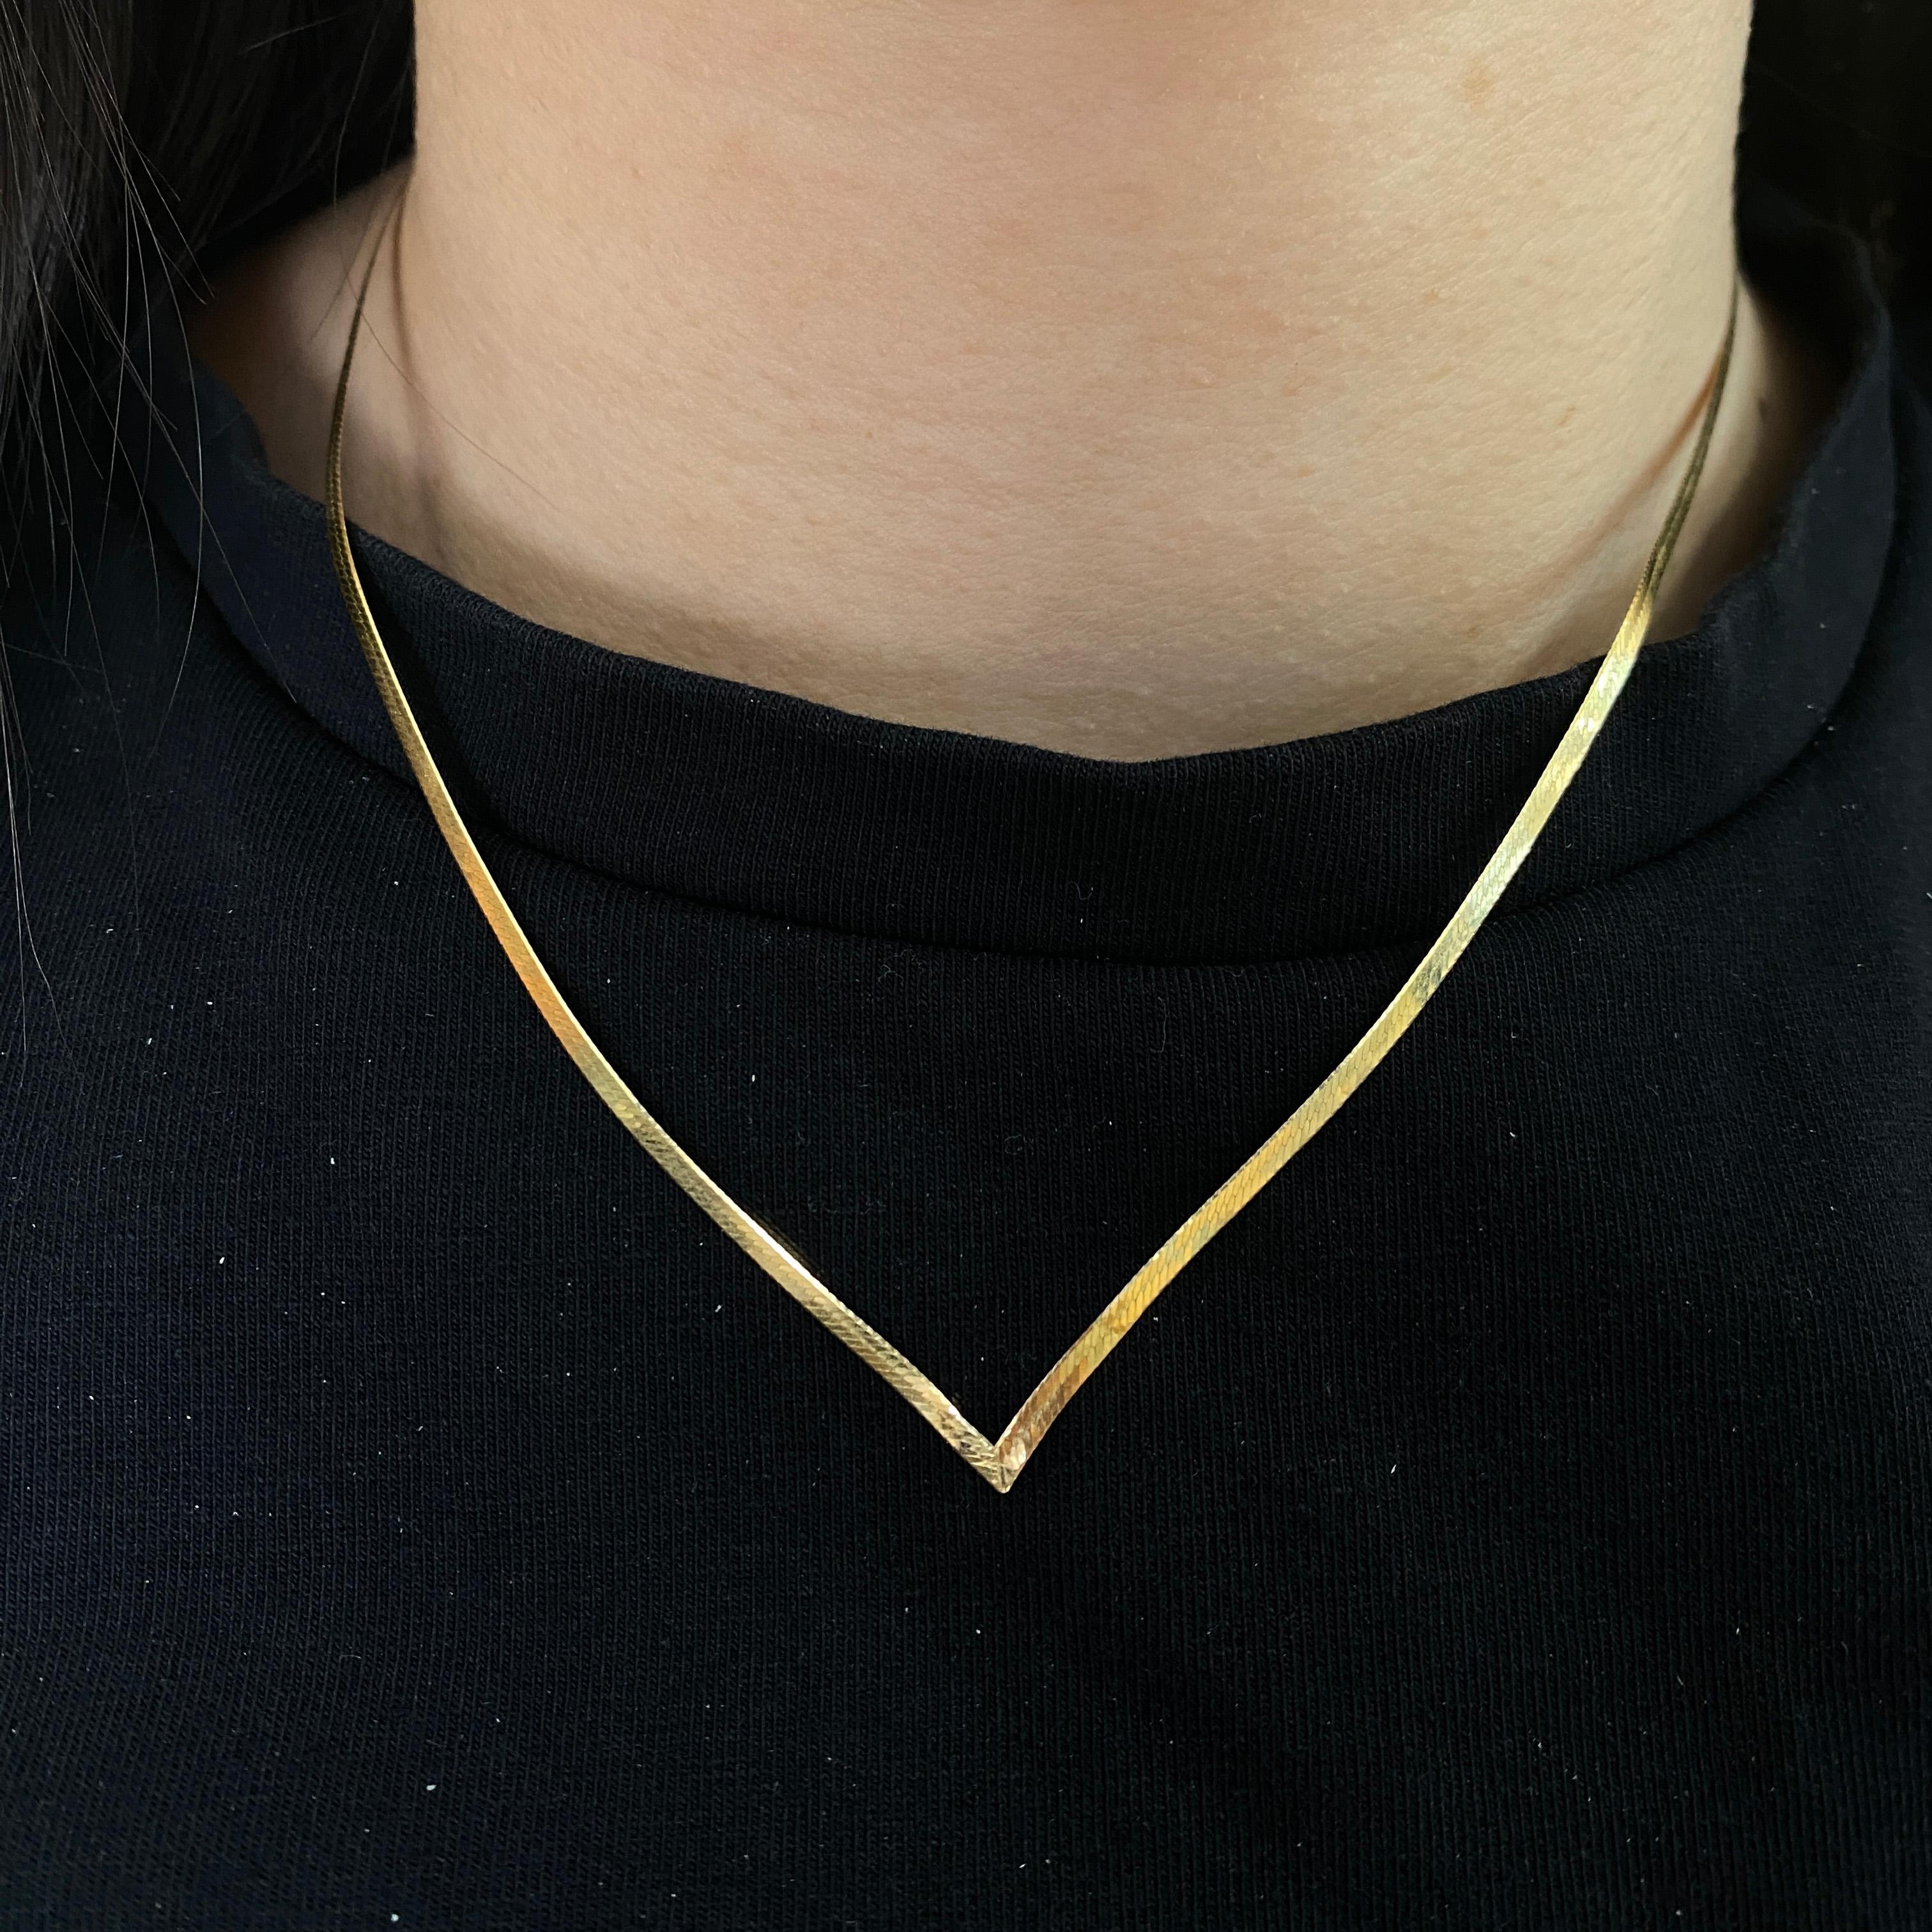 Sleek and shimmering, herringbone chains add a touch of luxury to your look. The precise 'v' point at the center of this chain adds a flattering style and fit. This gorgeous chain is crafted to the fine quality standards that Italian jewelry is know